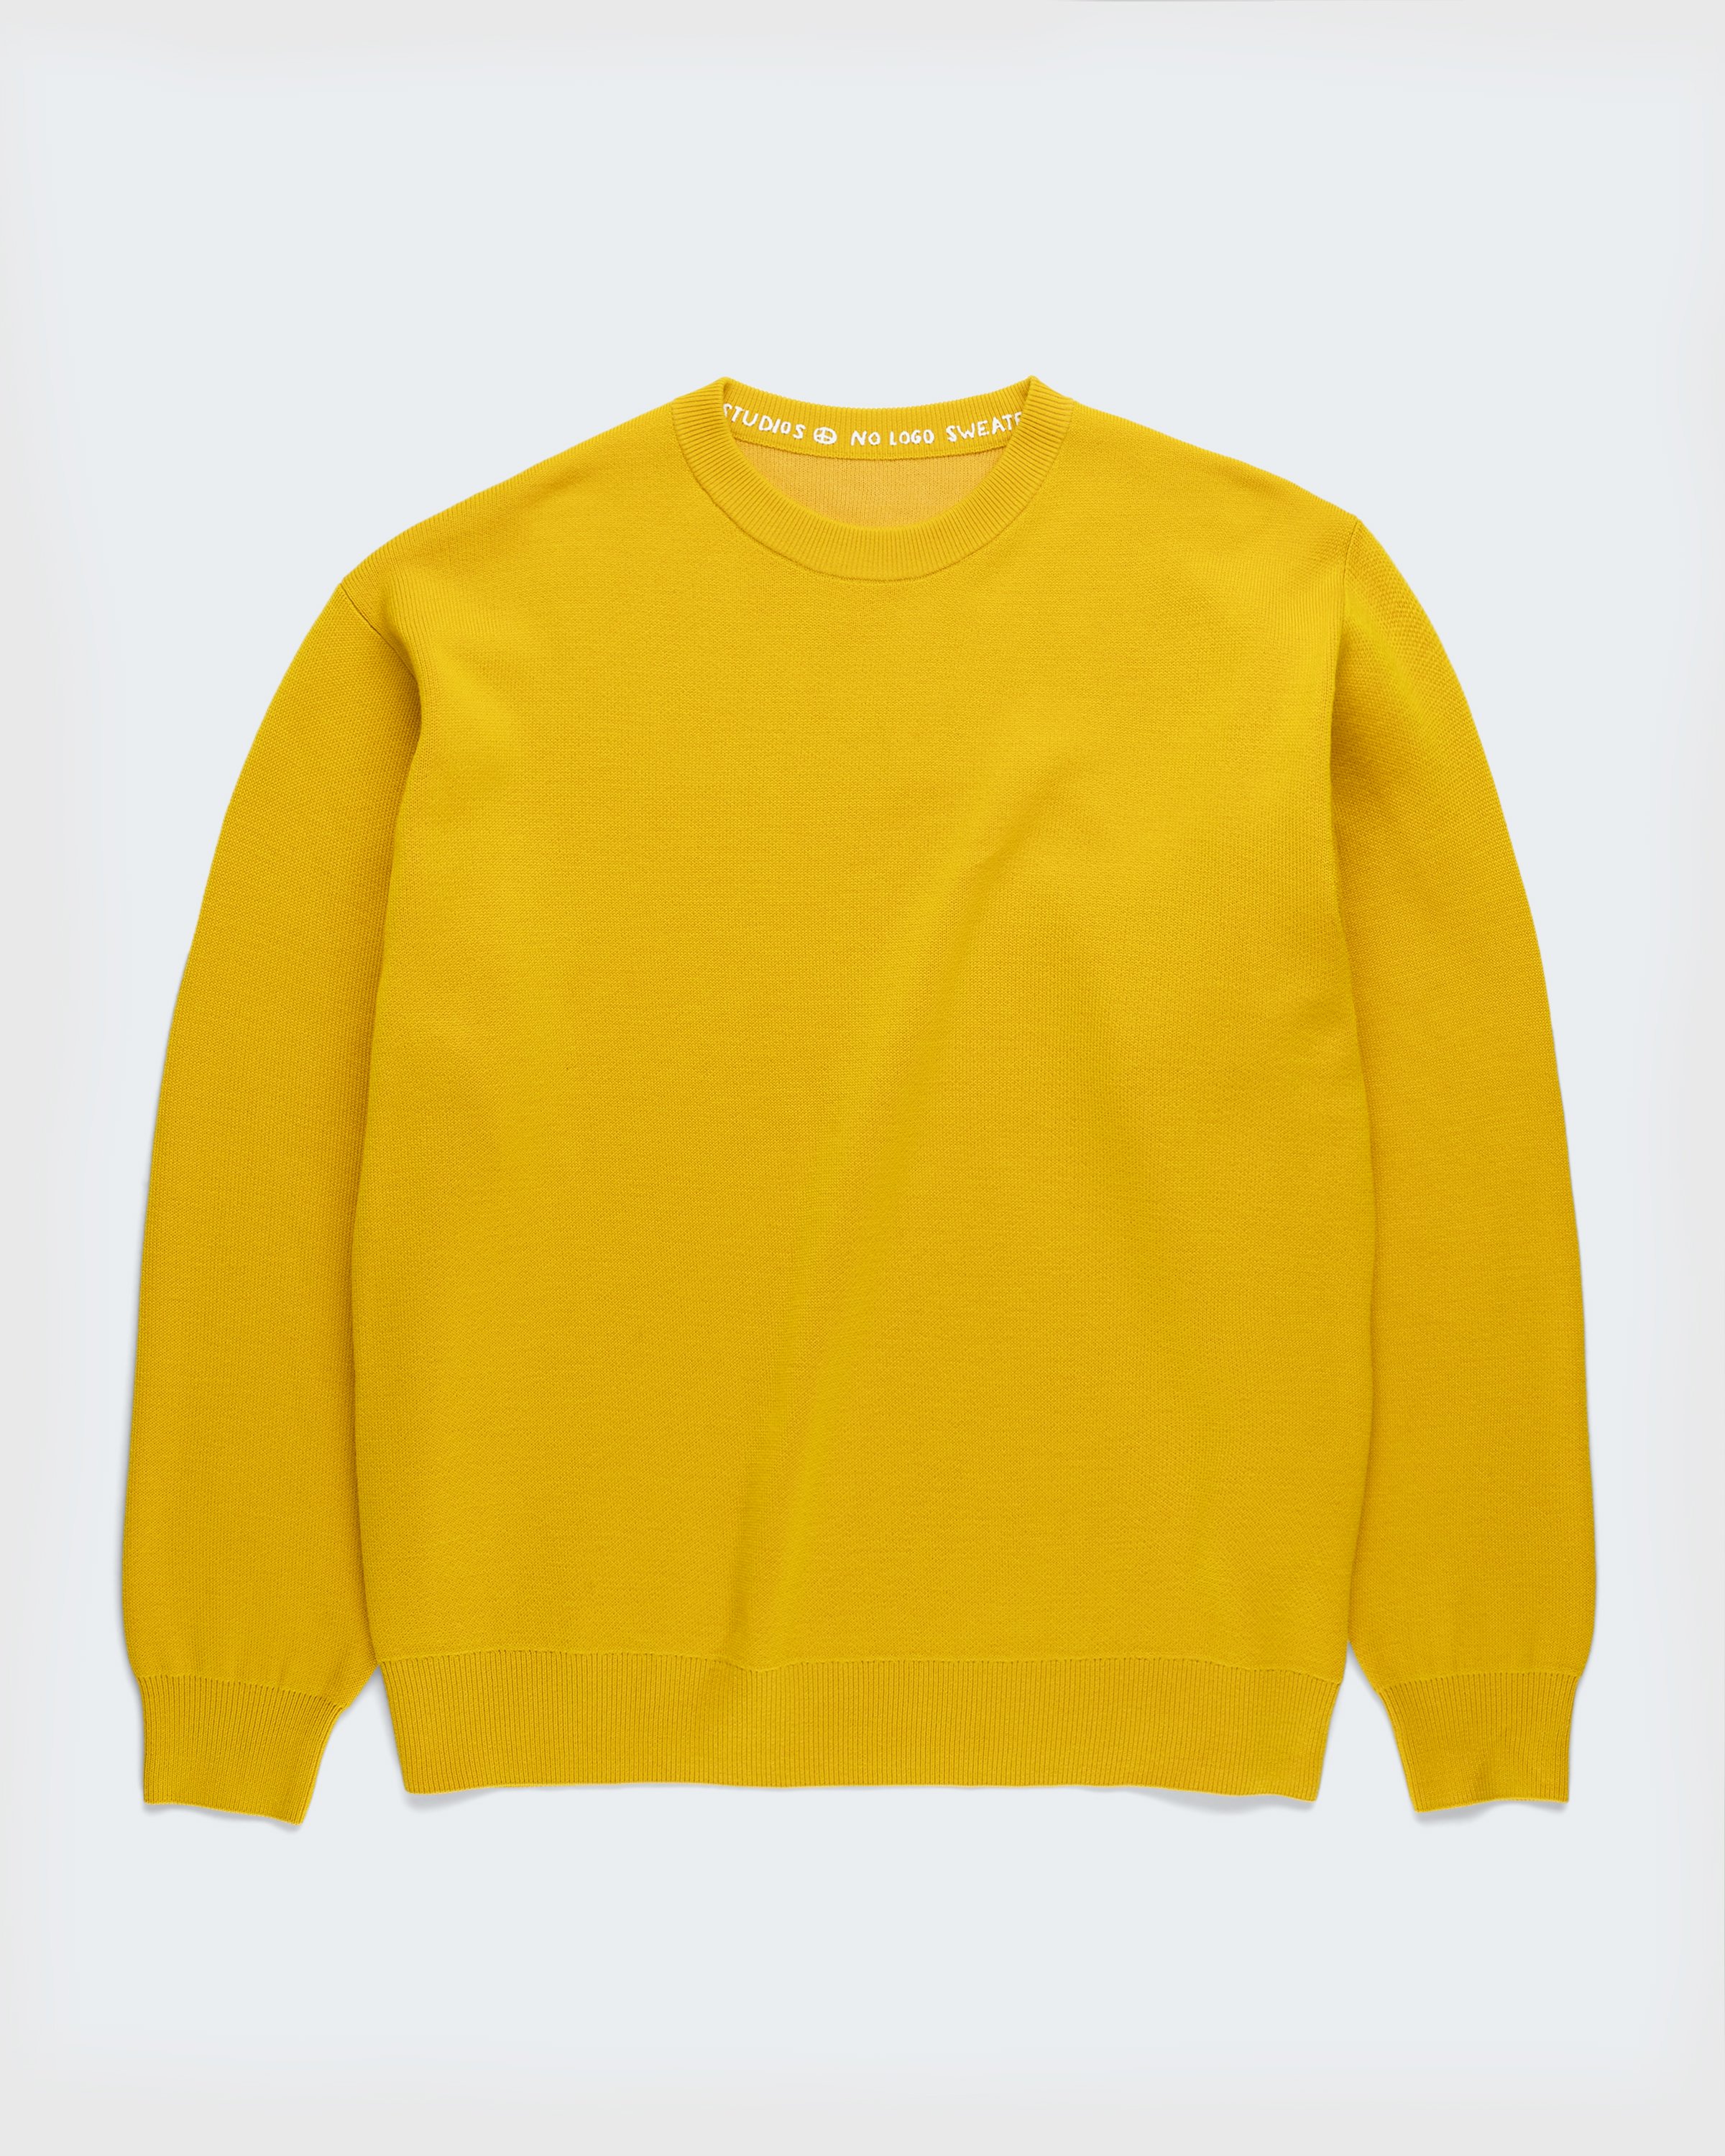 Yellow Seamless Sweater by Universal Works on Sale